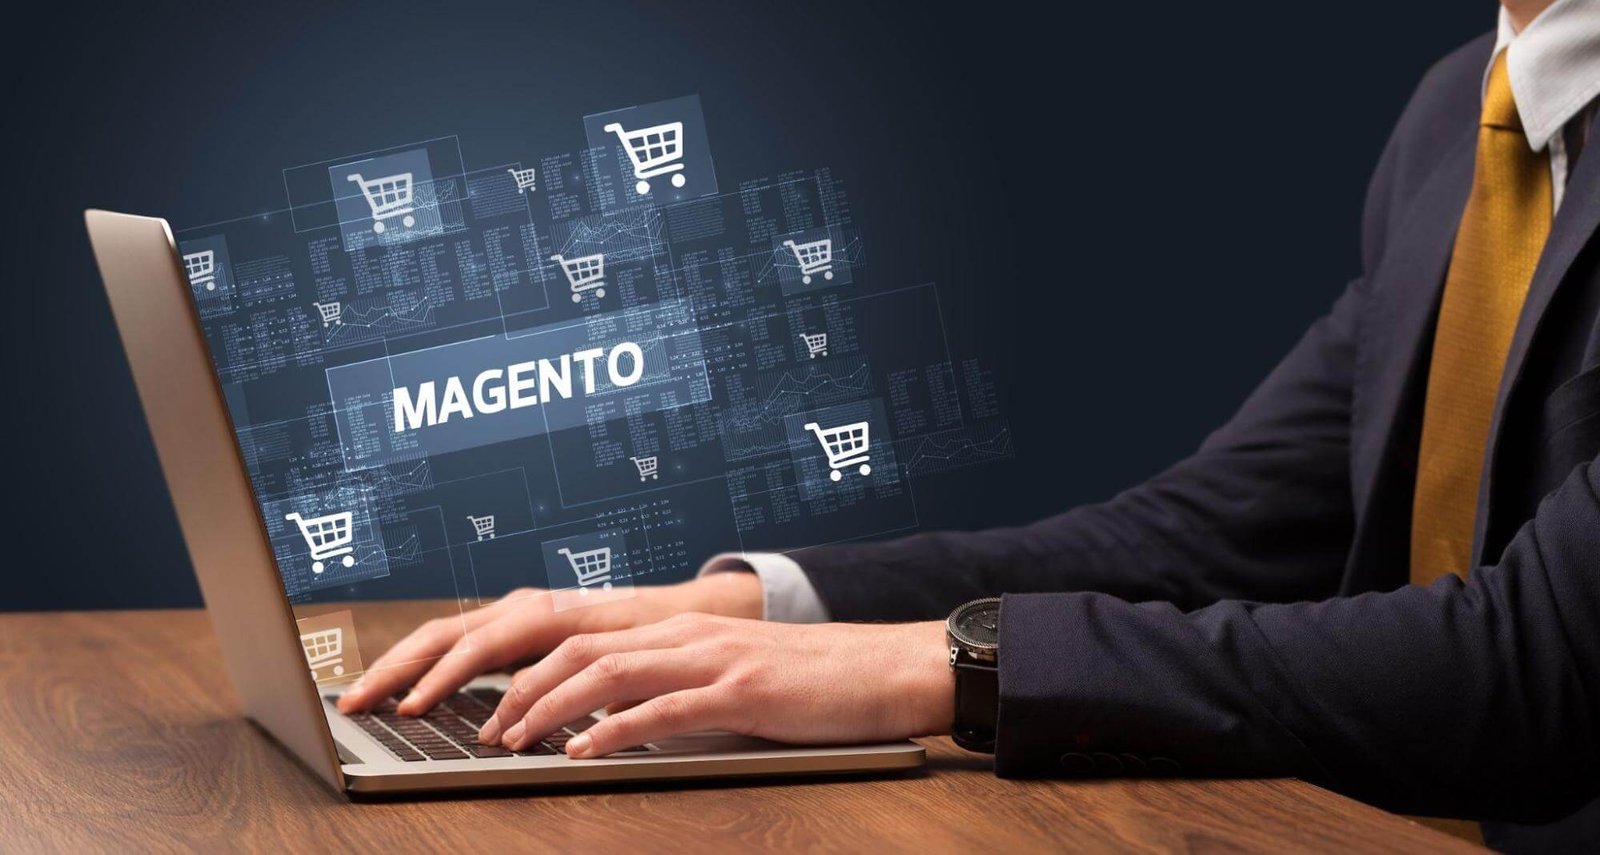 Why Use Magento Development Services for Web Development?